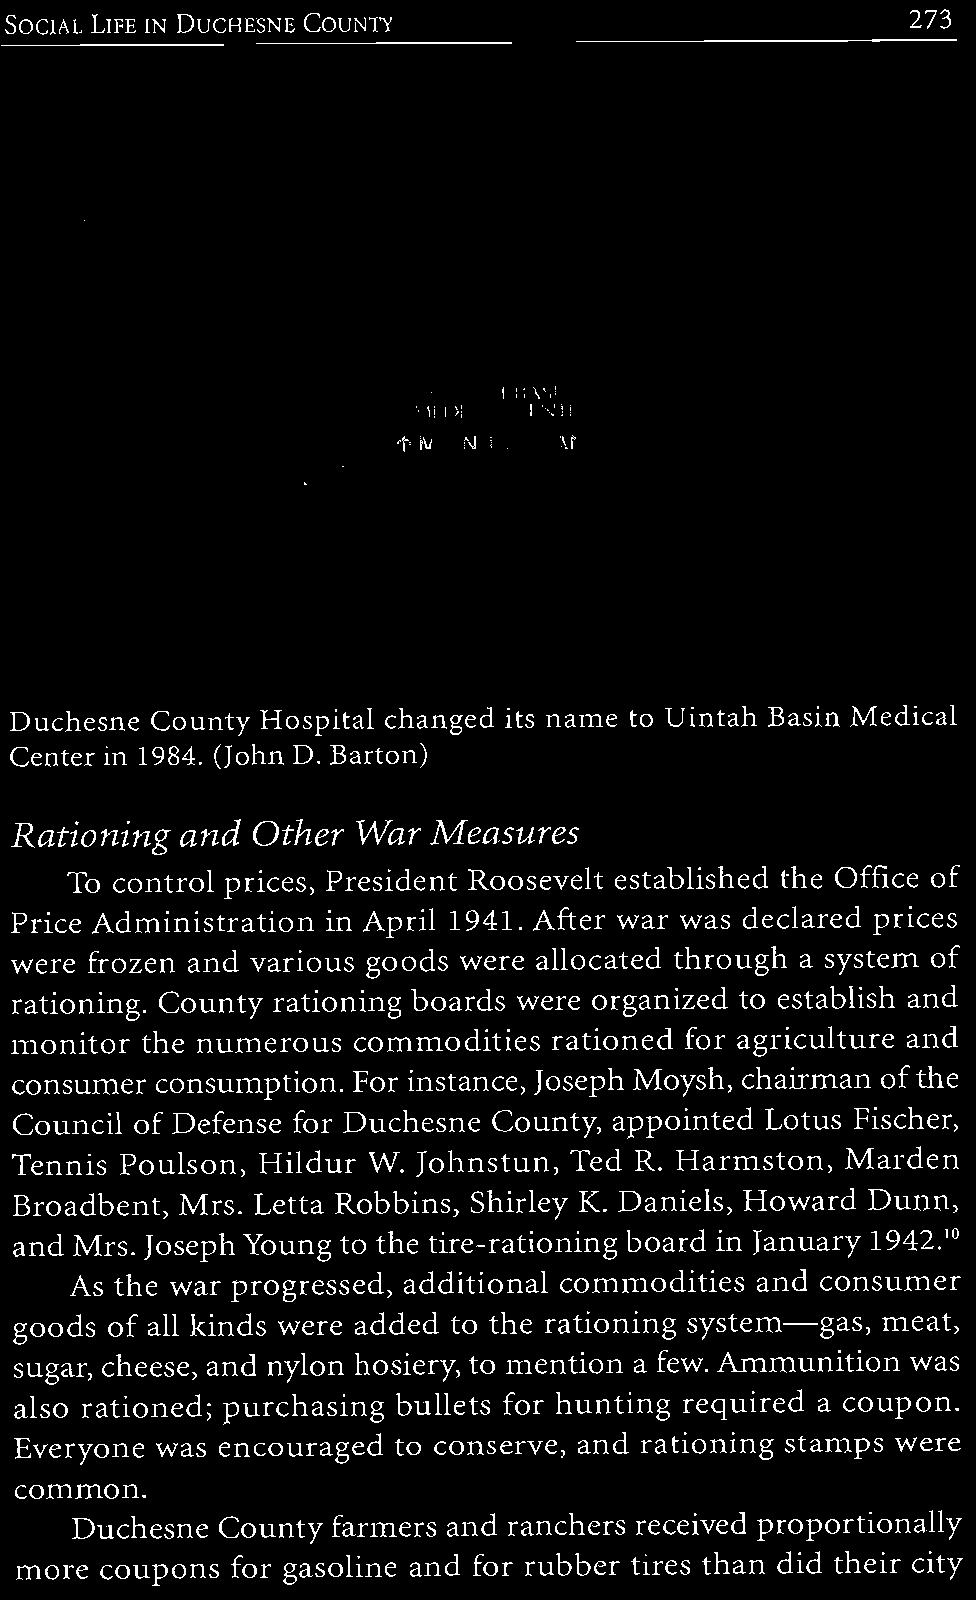 For instance, Joseph Moysh, chairman of the Council of Defense for Duchesne County, appointed Lotus Fischer, Tennis Poulson, Hildur W. Johnstun, Ted R. Harmston, Marden Broadbent, Mrs.